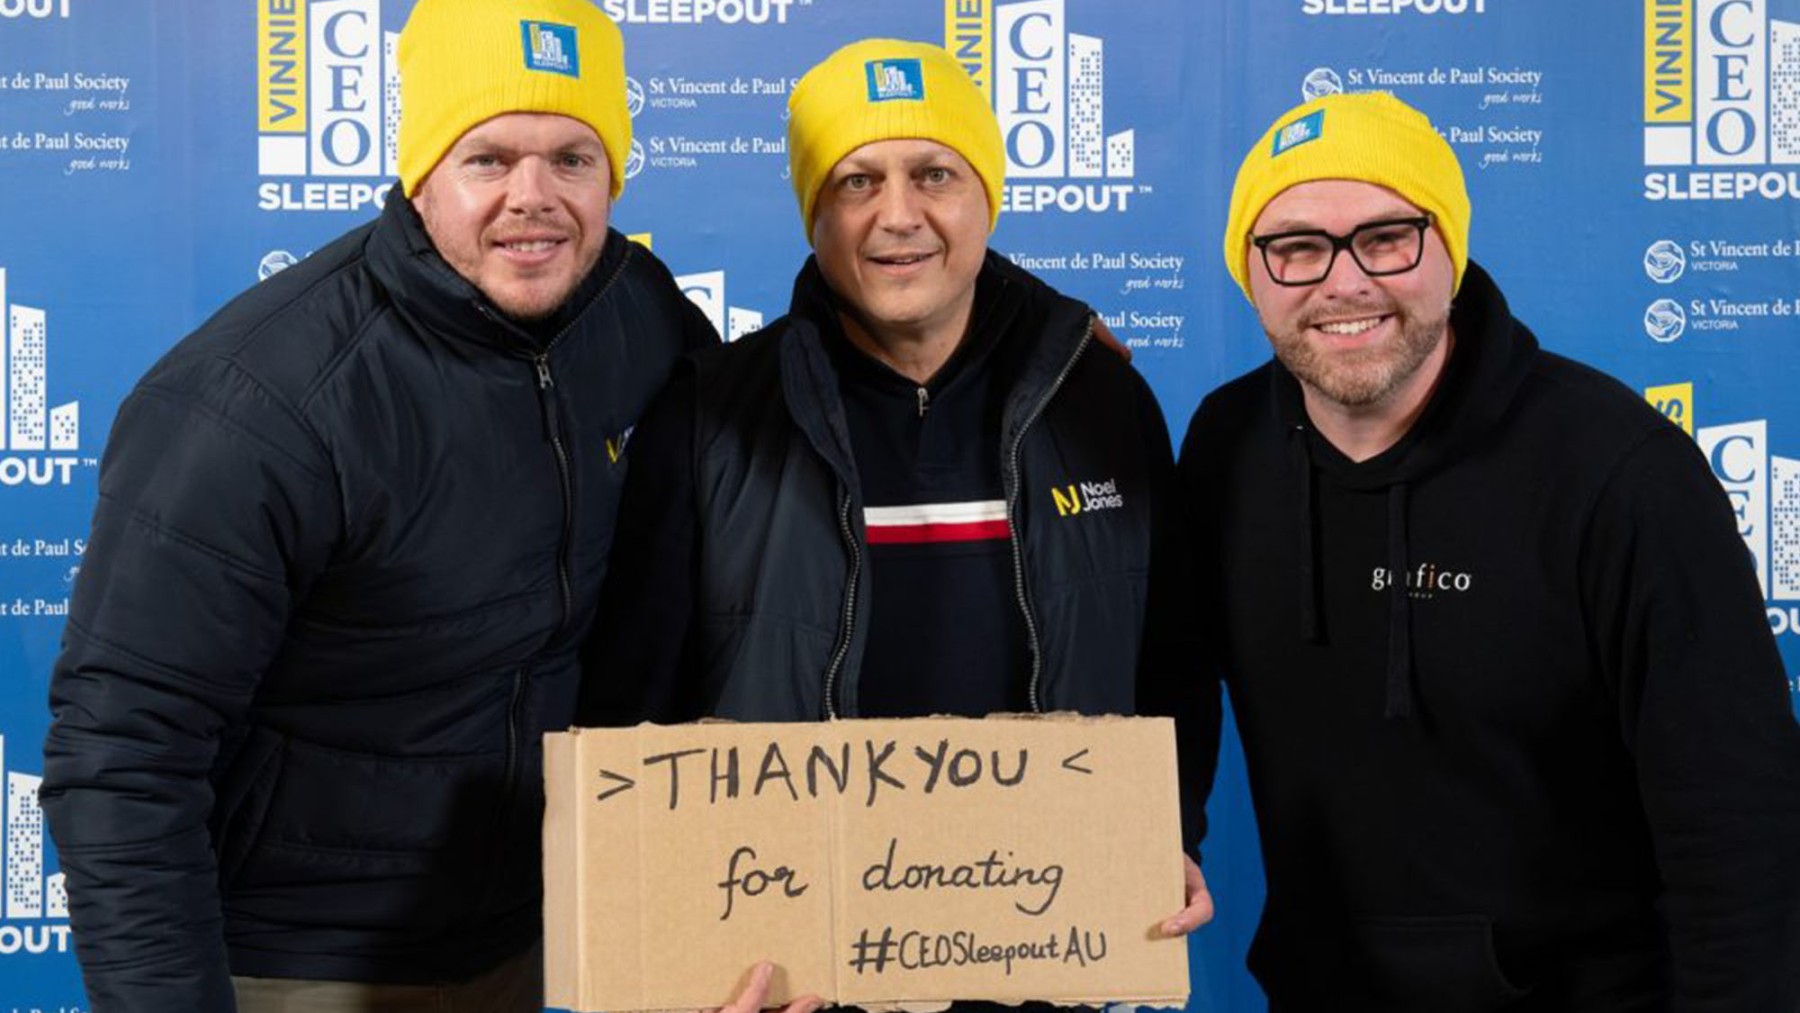 Grafico smashes donation expectations for this year's Vinny's CEO Sleepout